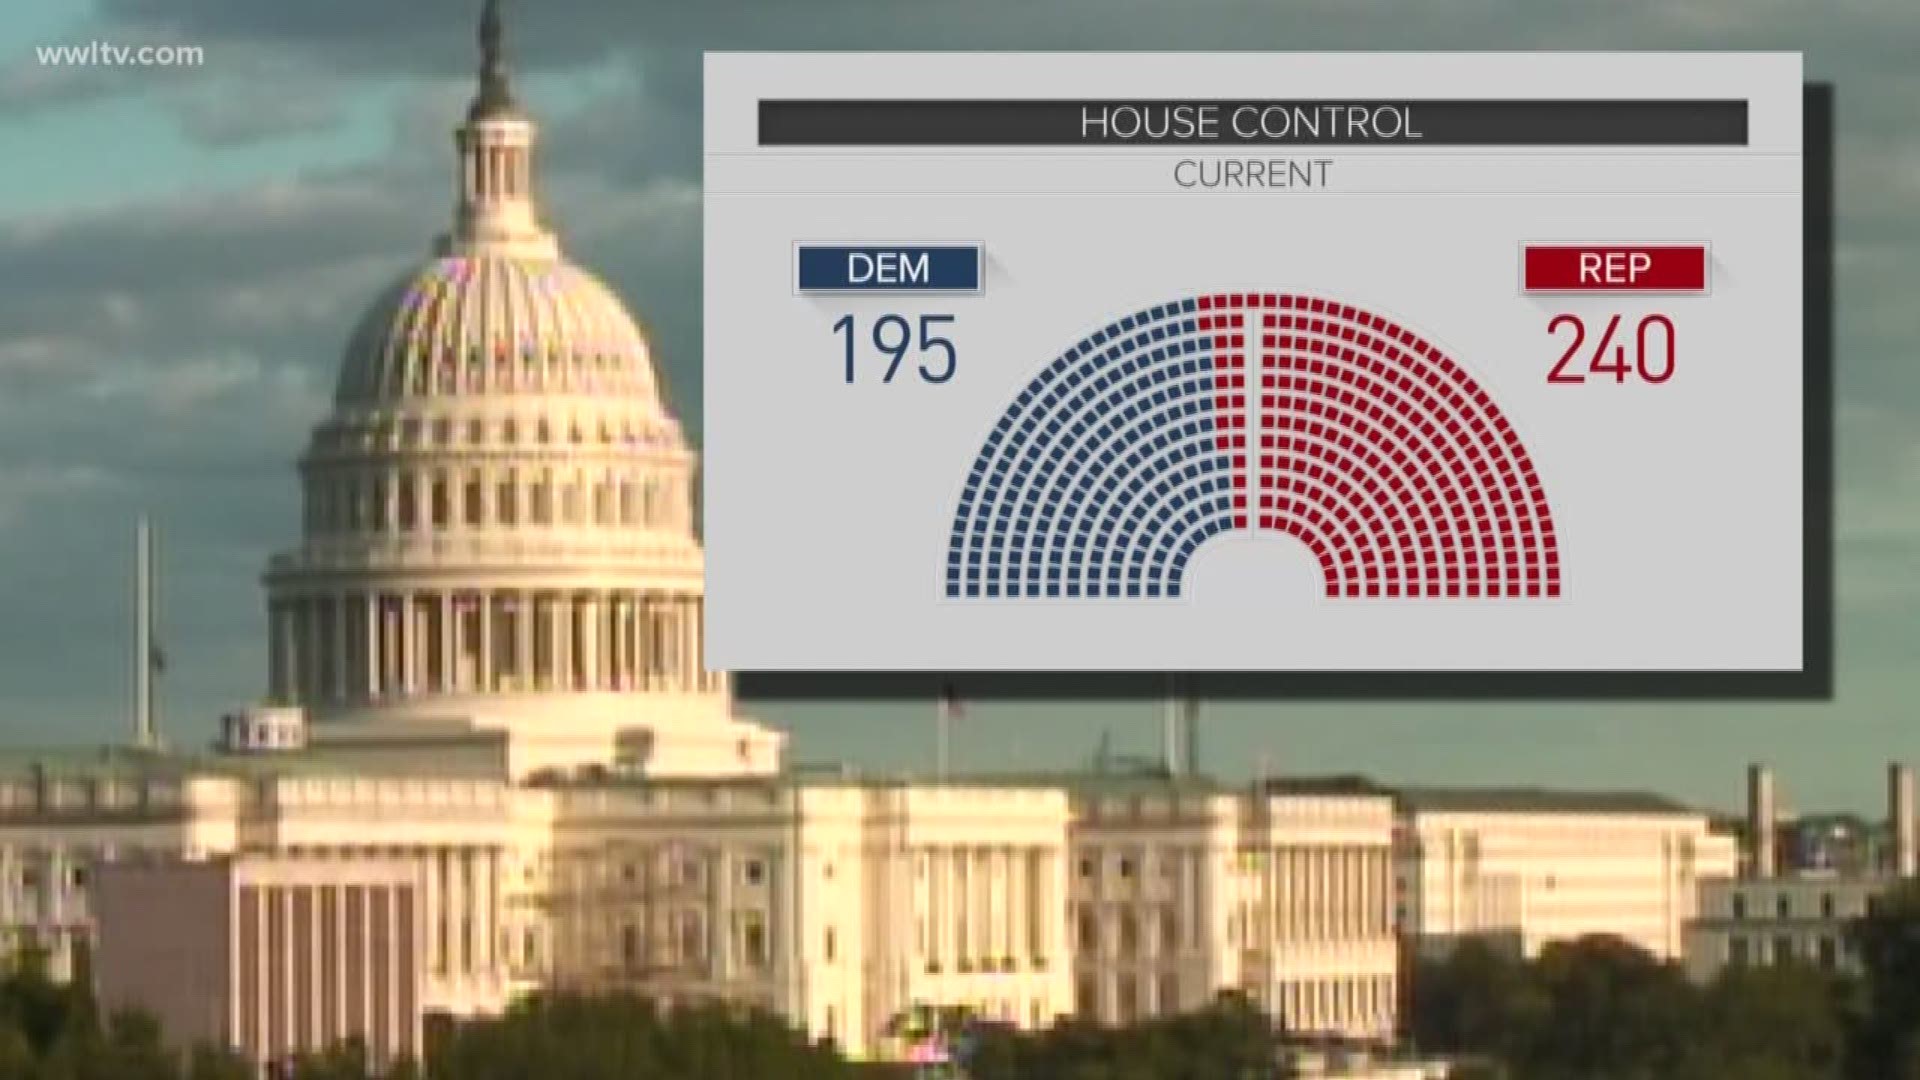 Right now, there are 195 Democrats and 240 Republicans in the House. The Democrats need a net gain of 23 seats to win a majority.